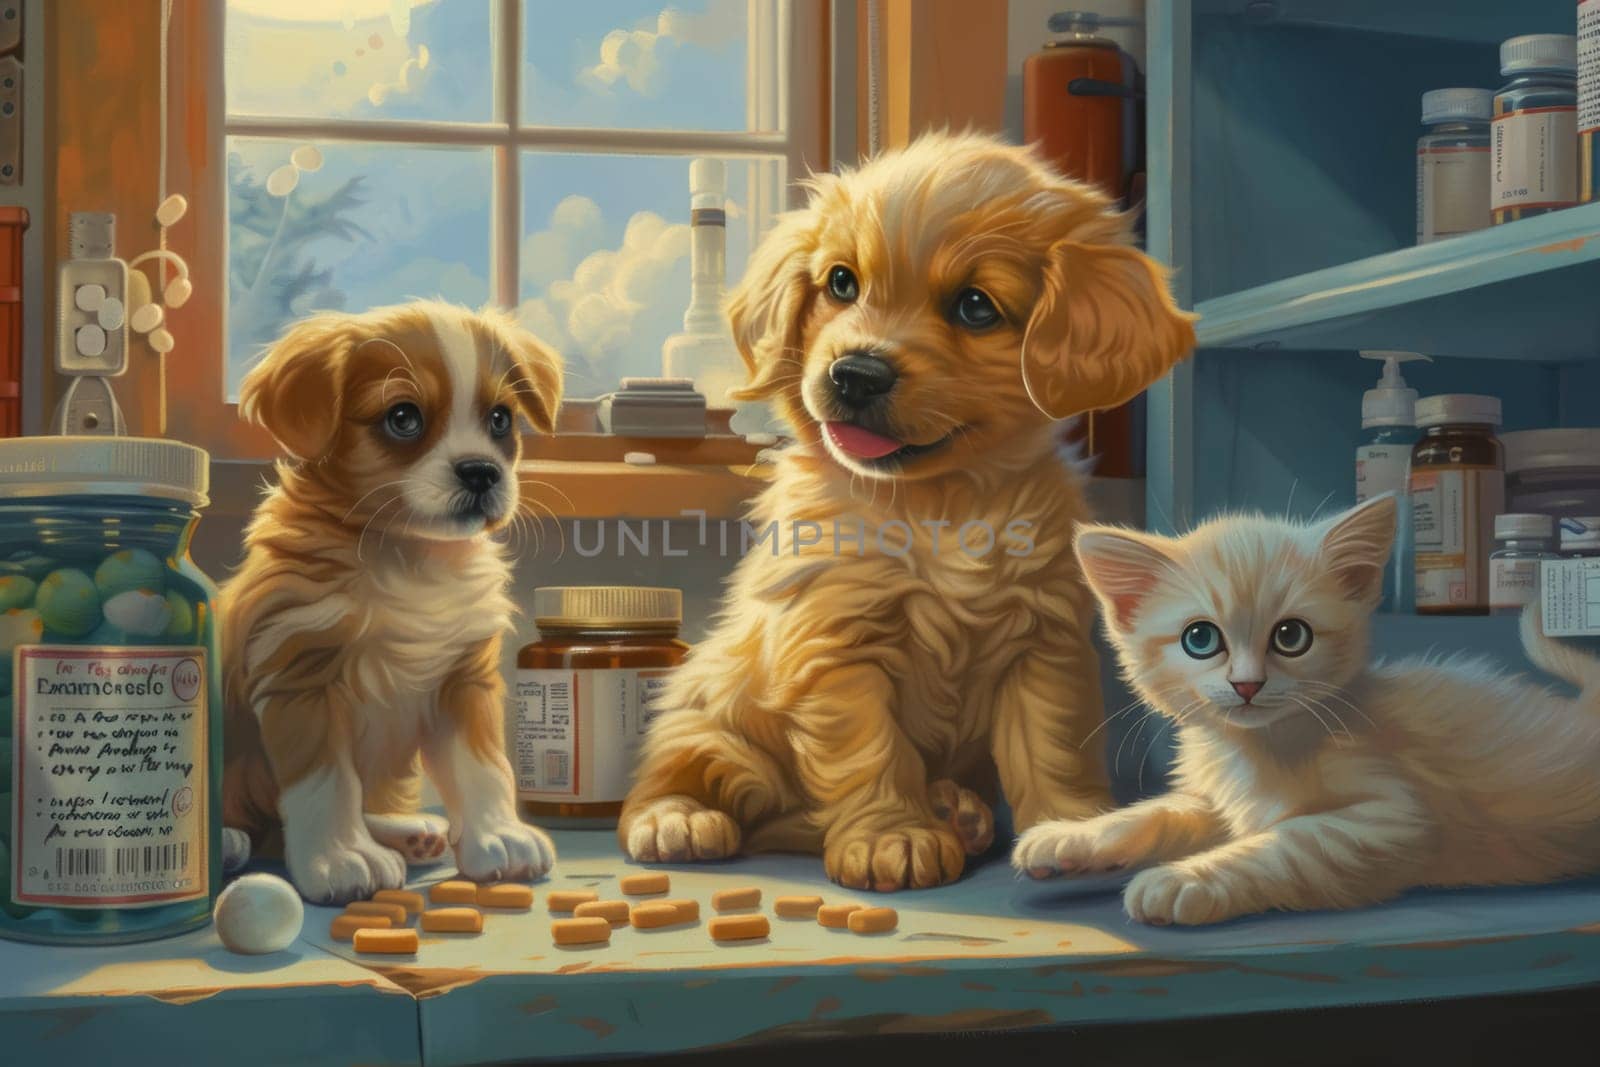 Two adorable puppies and a curious kitten enjoy a playful time together among pet toys and treats, in a cozy indoor setting filled with warmth and companionship